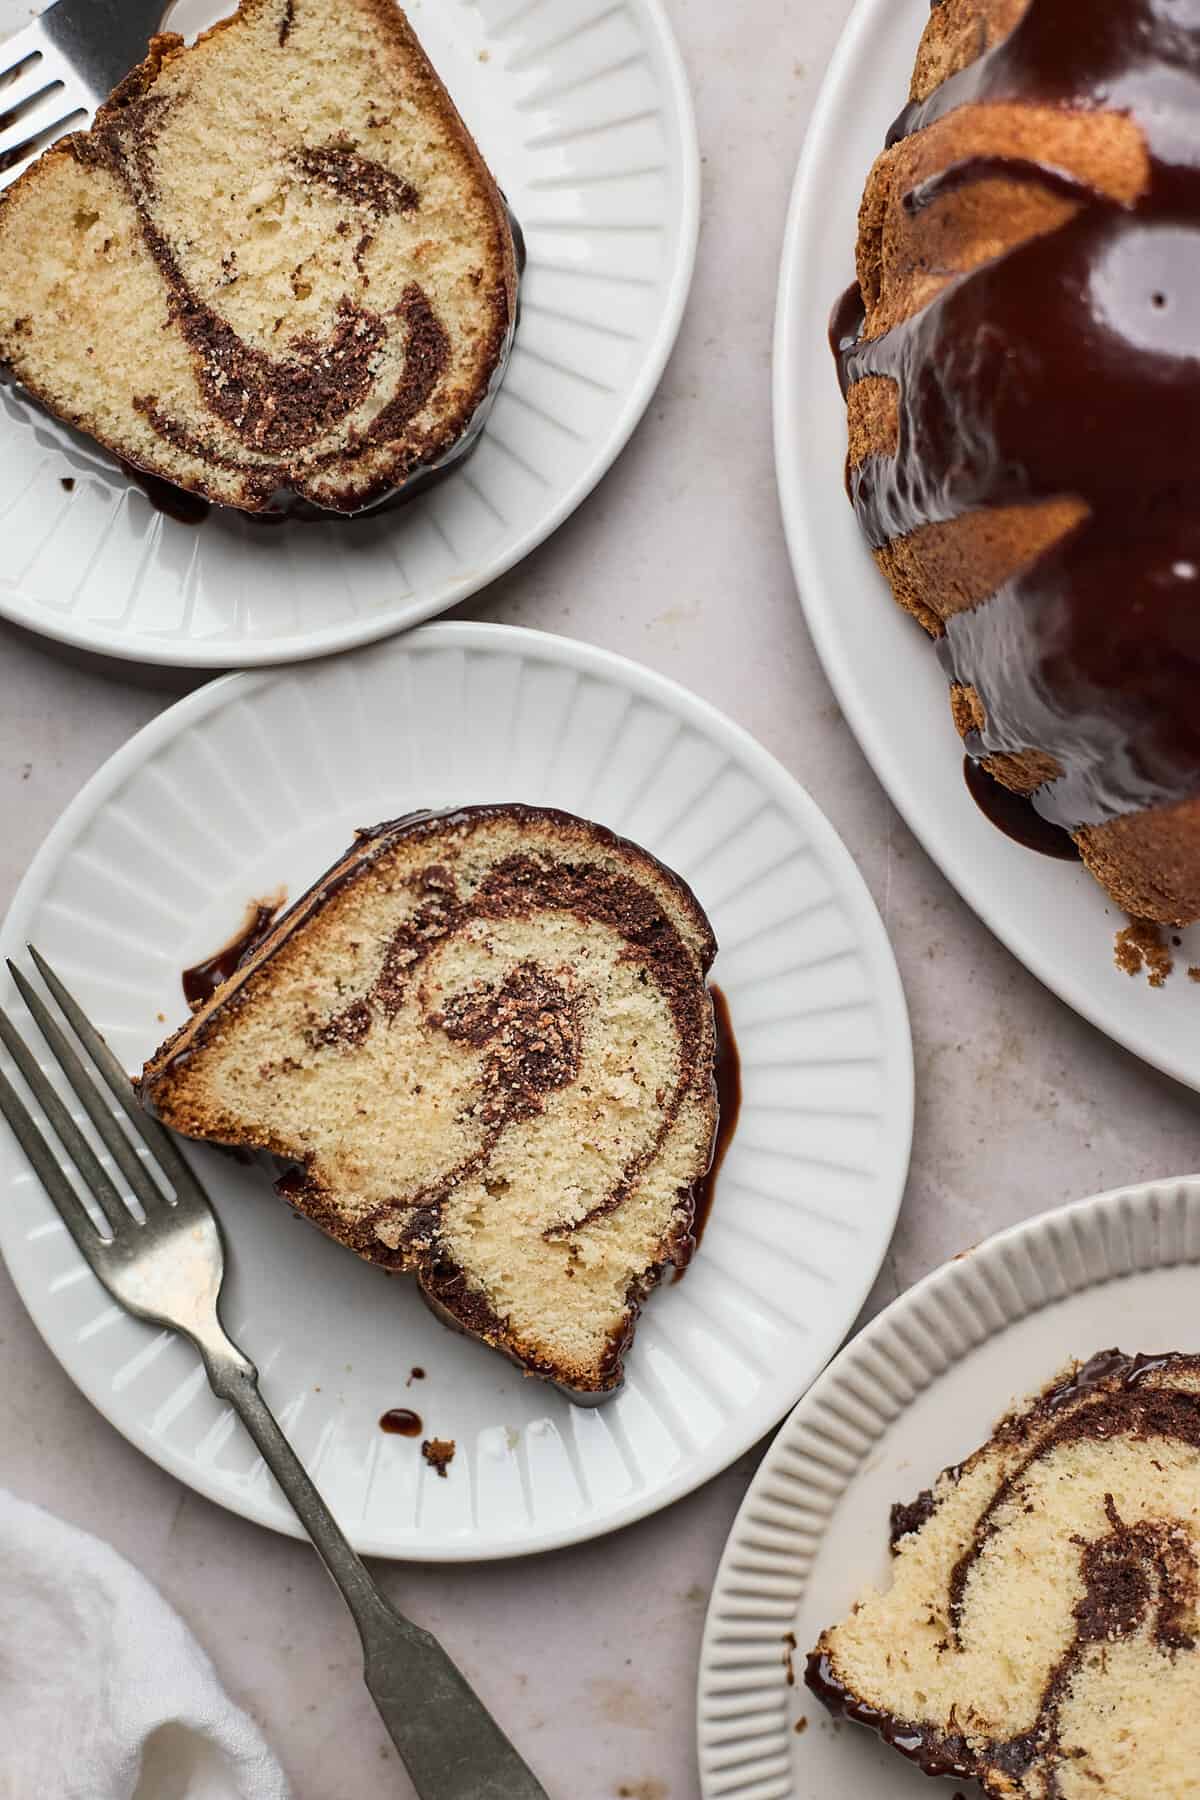 Slices of brownie swirl pound cake on little plates and the whole cake on the side of the image.